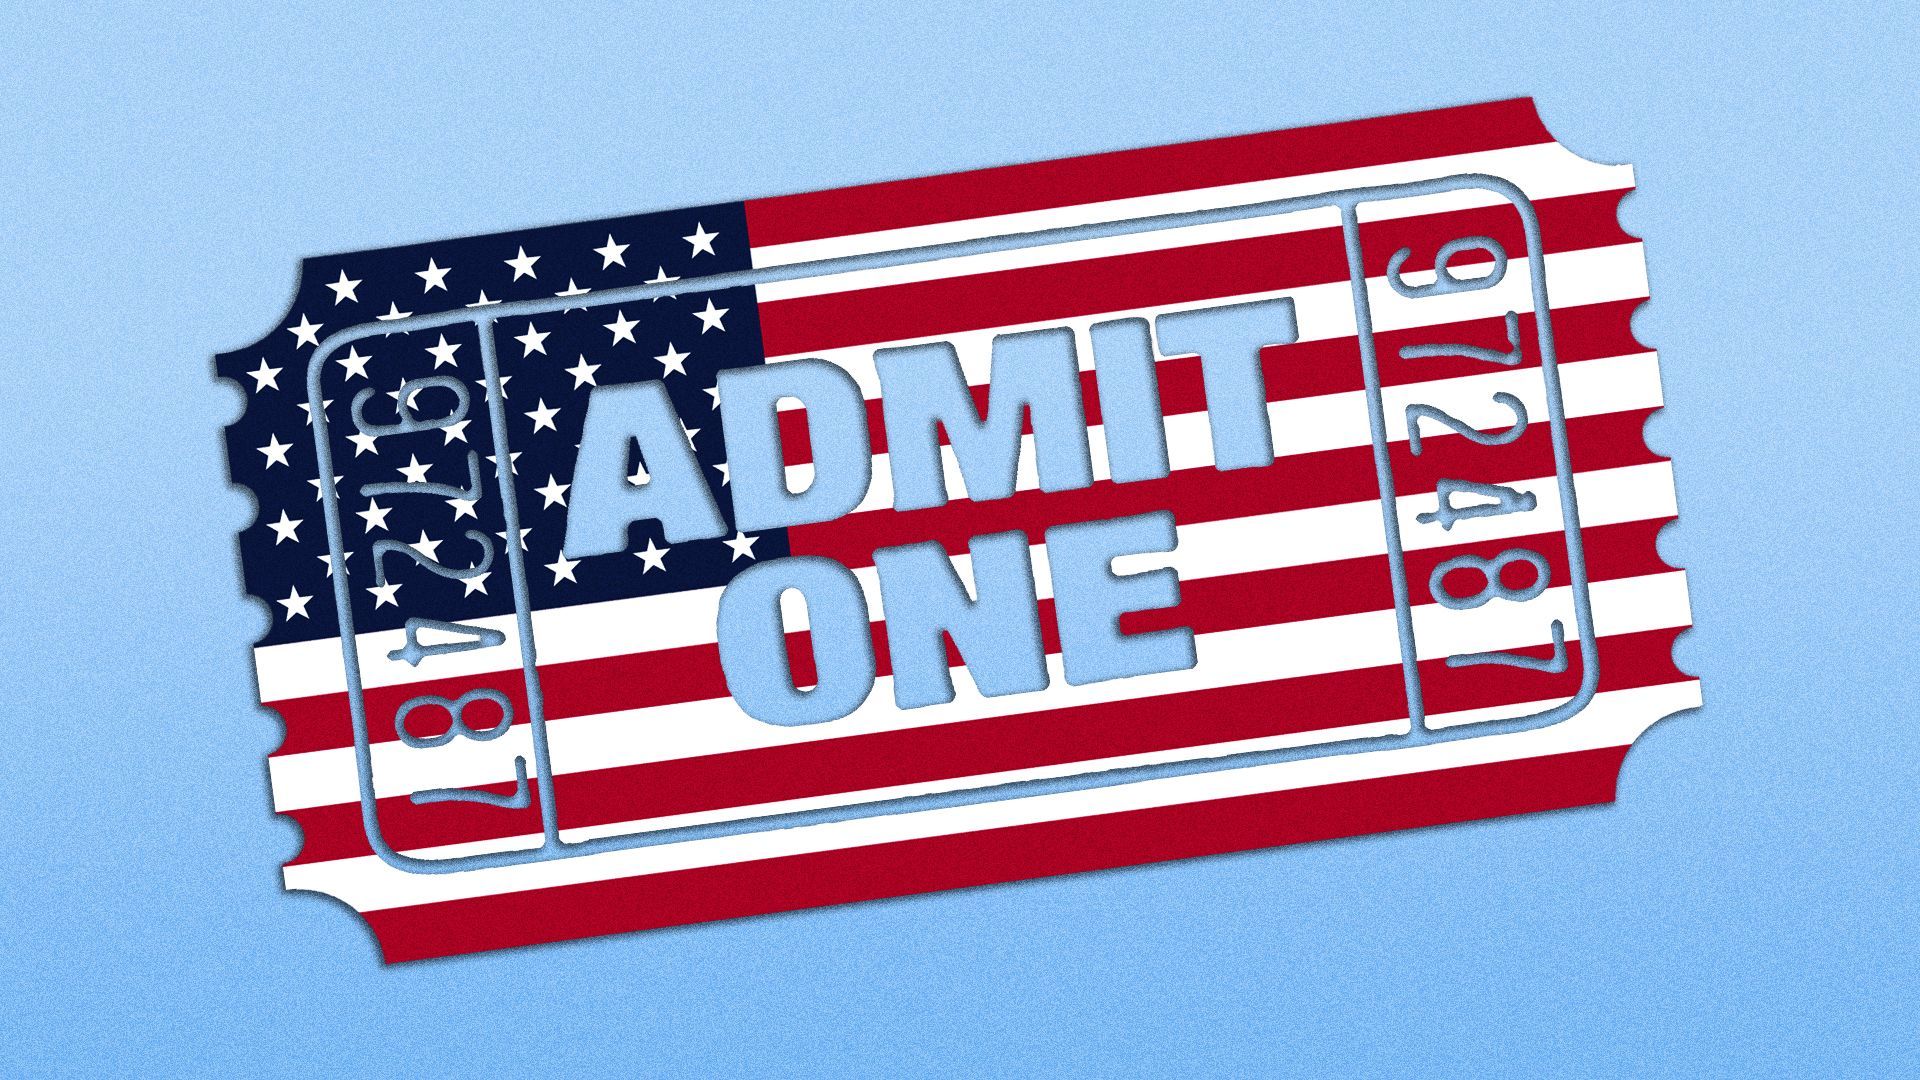 Illustration of an American flag printed on an admit one ticket. 